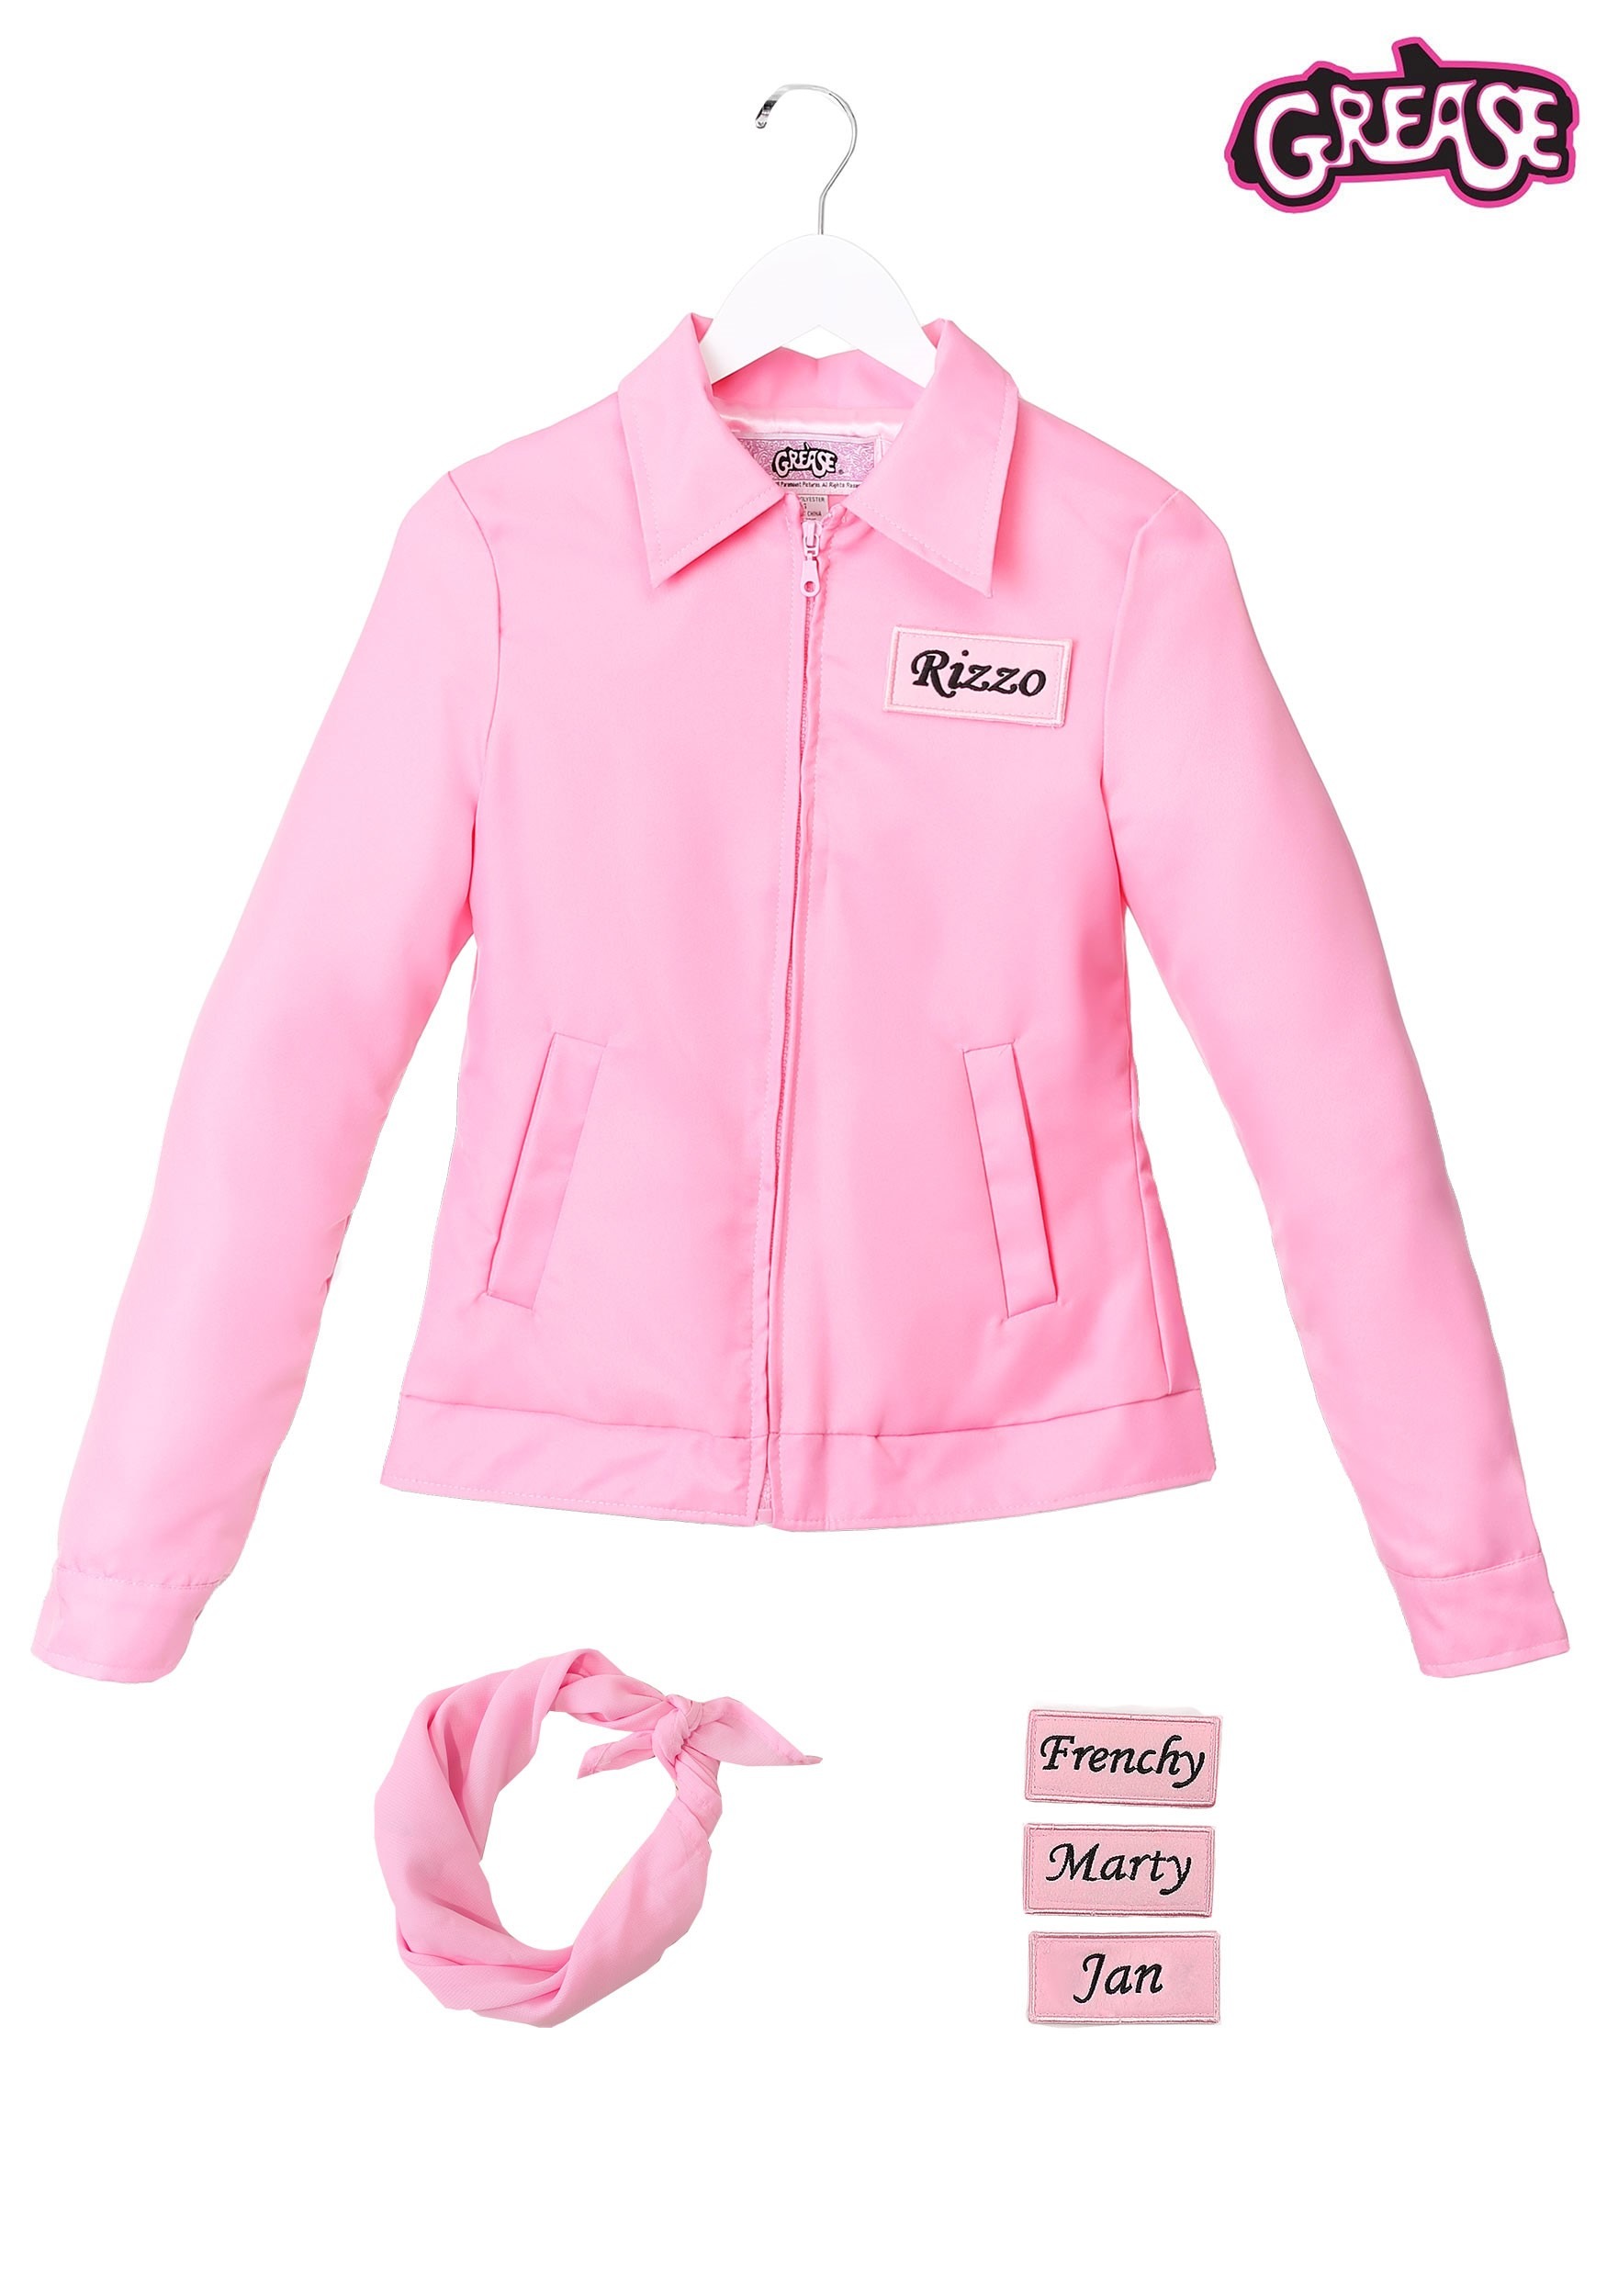 Authentic Grease Plus Size Pink Ladies Jacket Costume